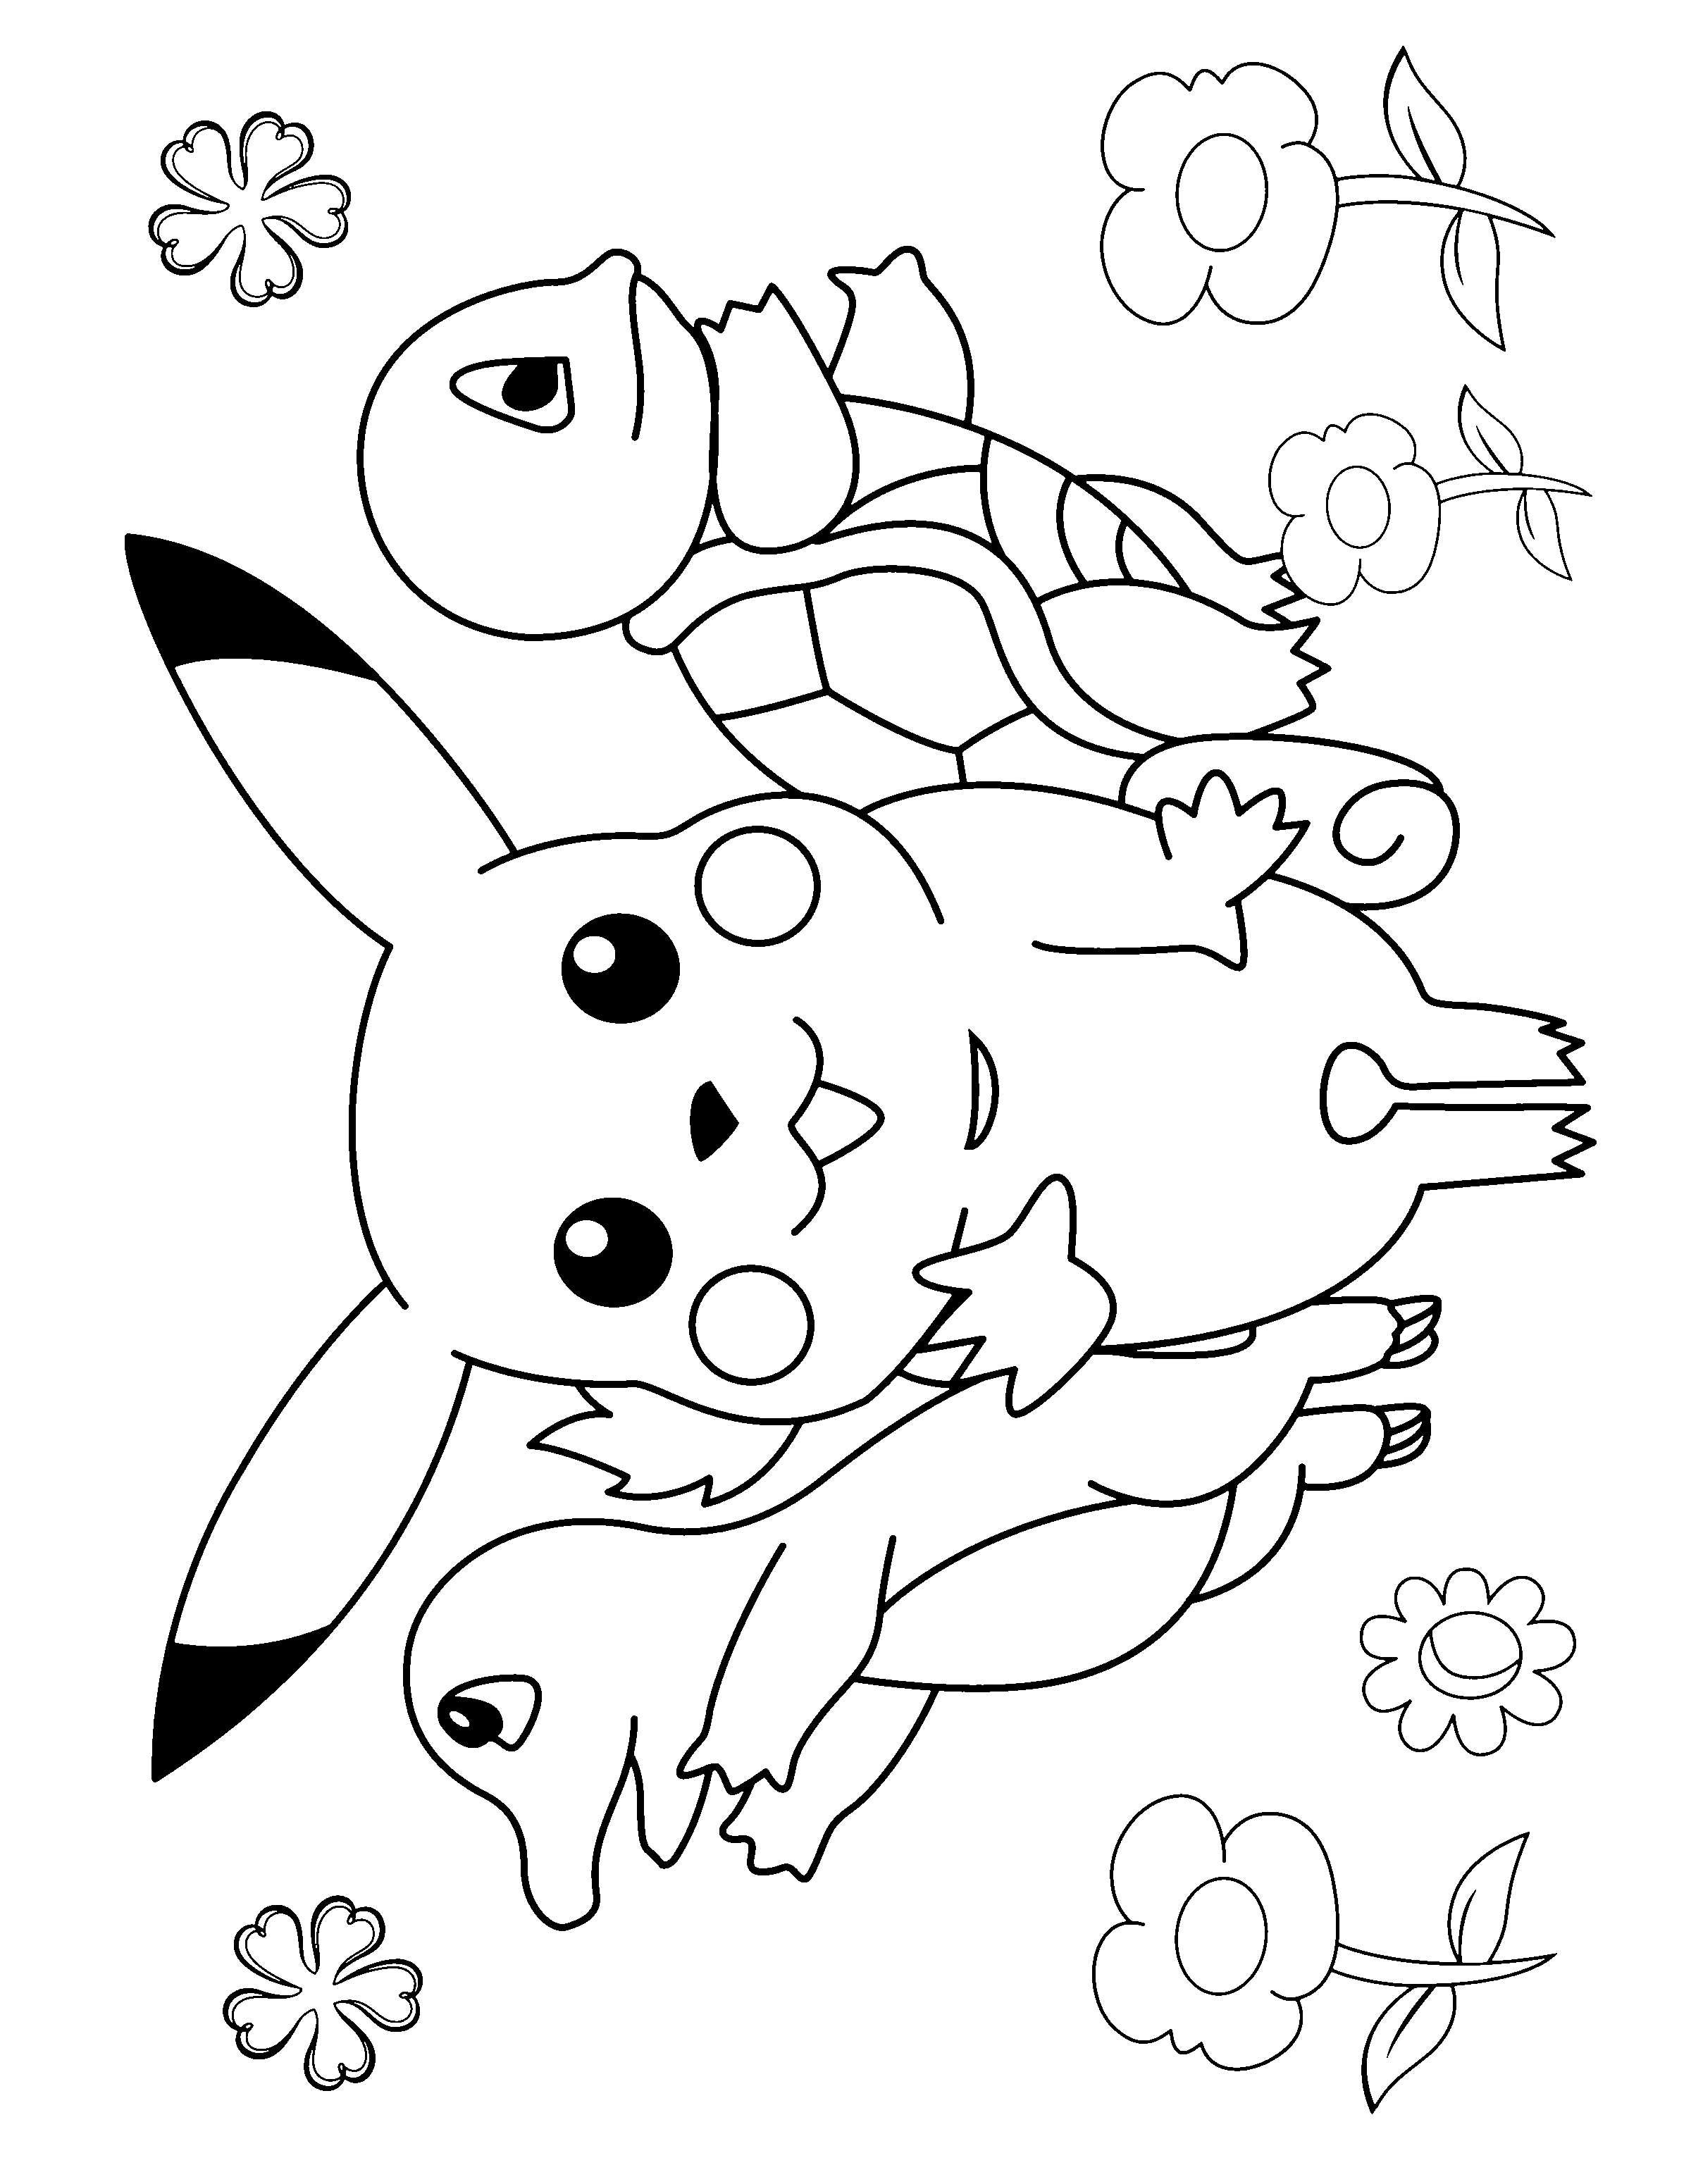 coloring-pages-pokemon-pokemon-pages-coloring-colouring-poke-media-we